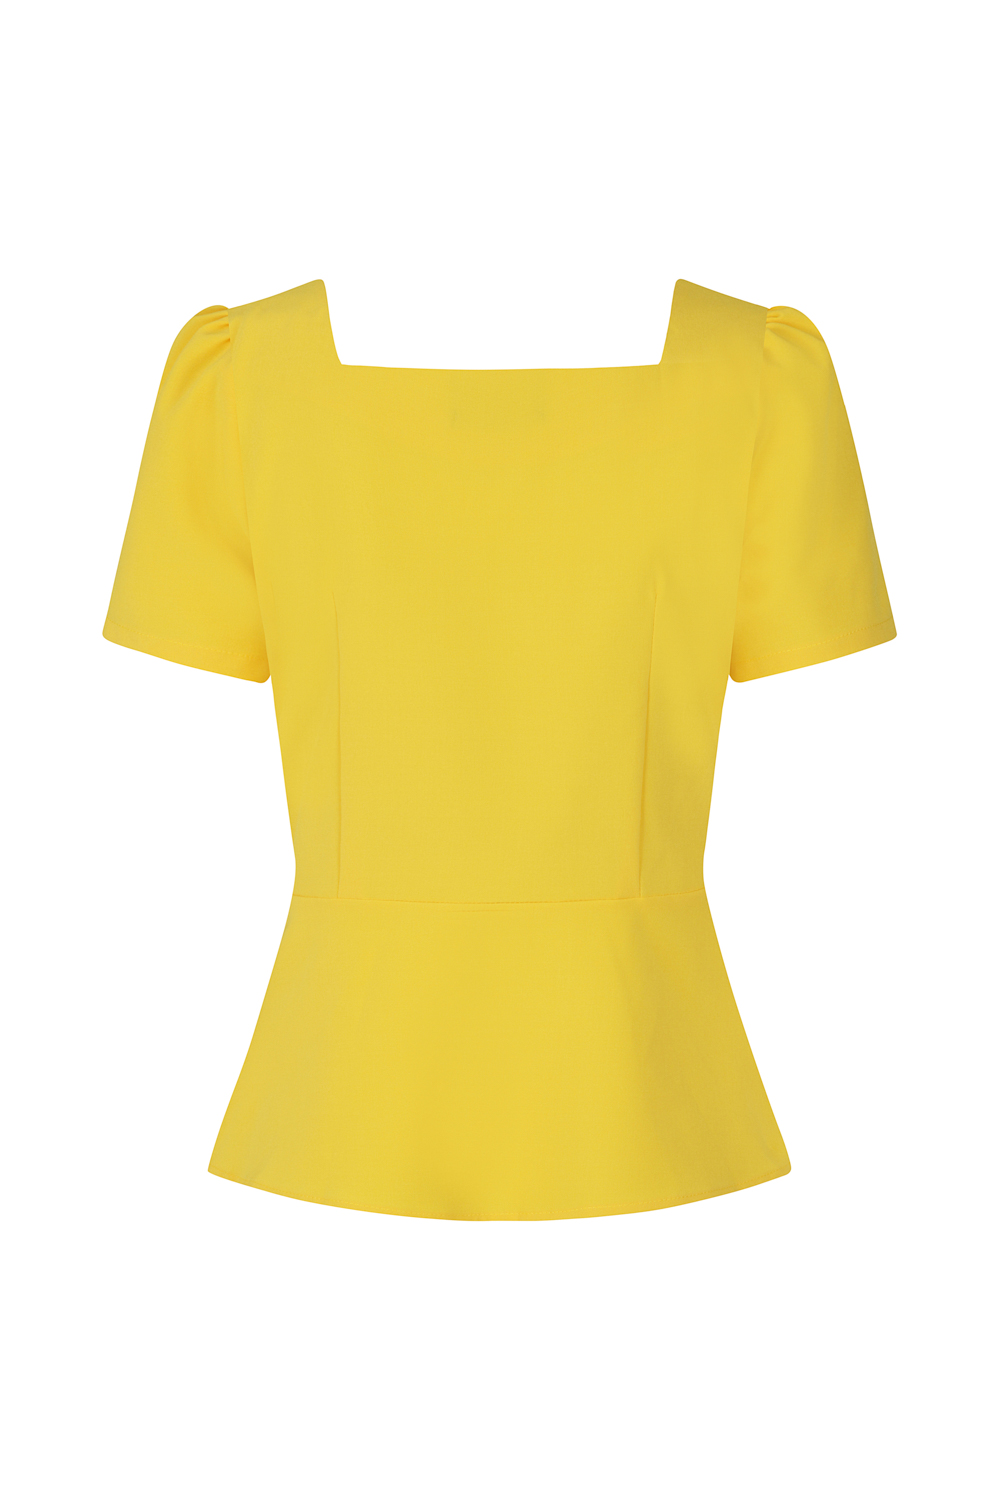 Yellow Beatrice Top in Yellow - Hearts & Roses London